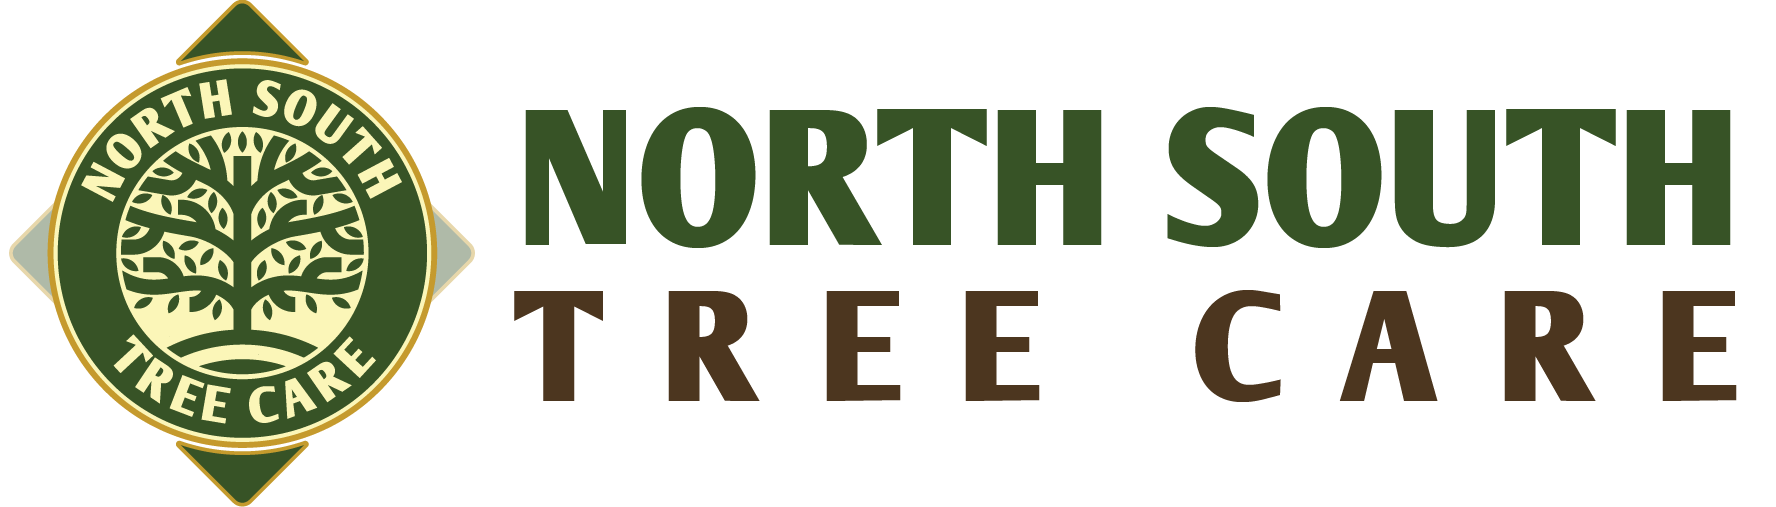 North South Tree Care